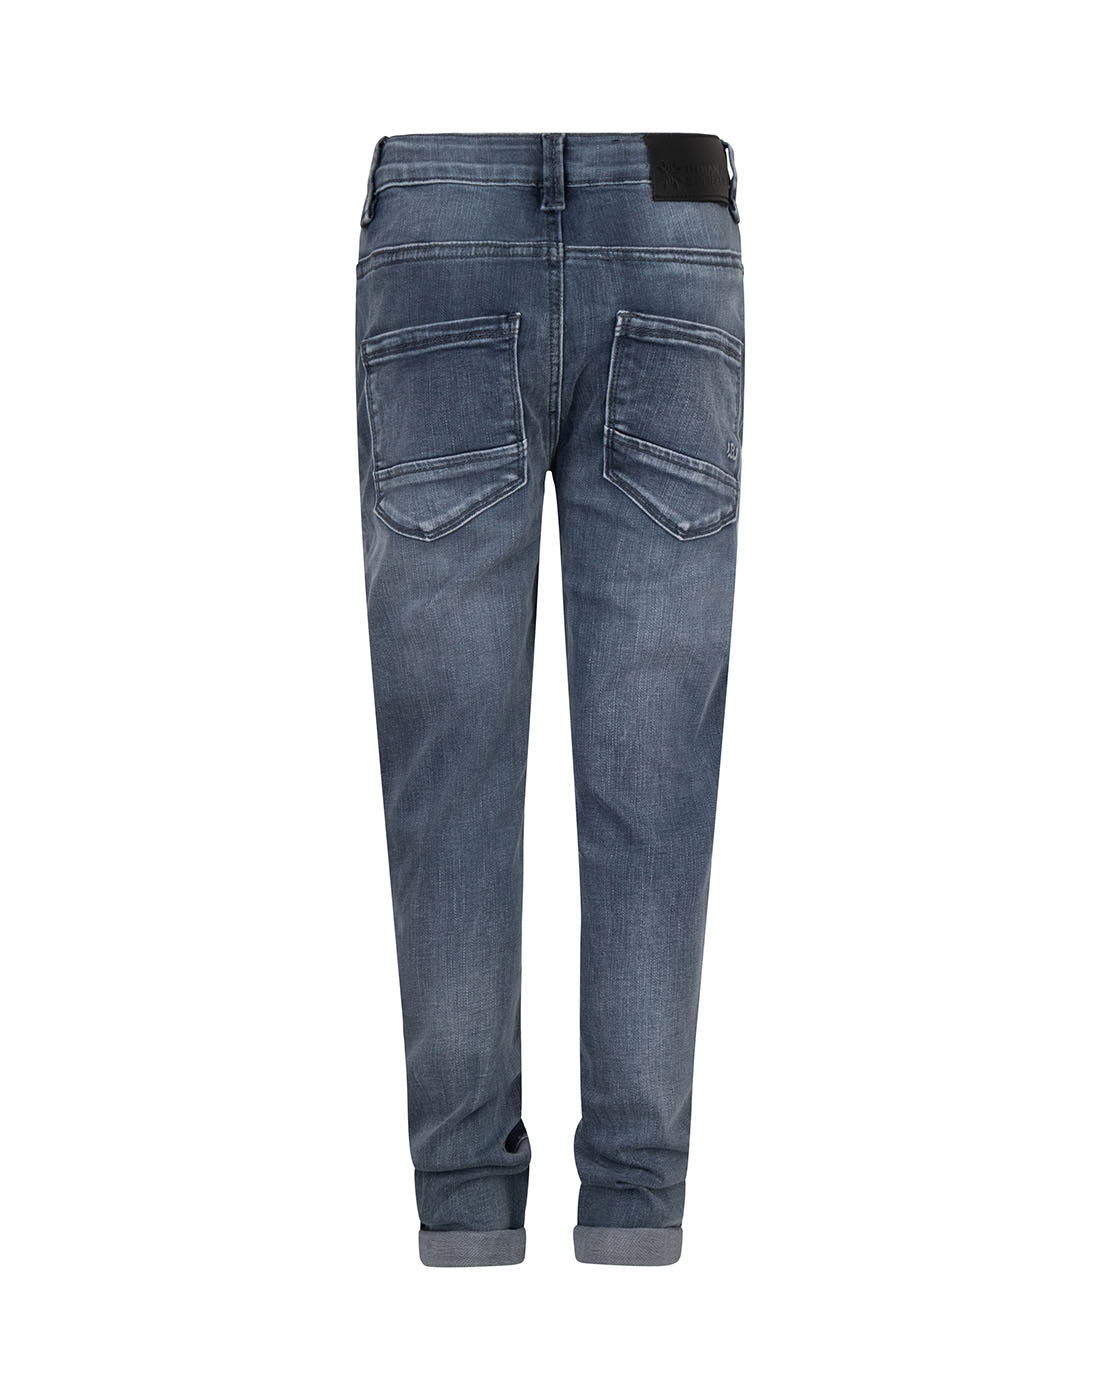 Indian Blue Jeans Jeans Blue Jay Tapered Fit